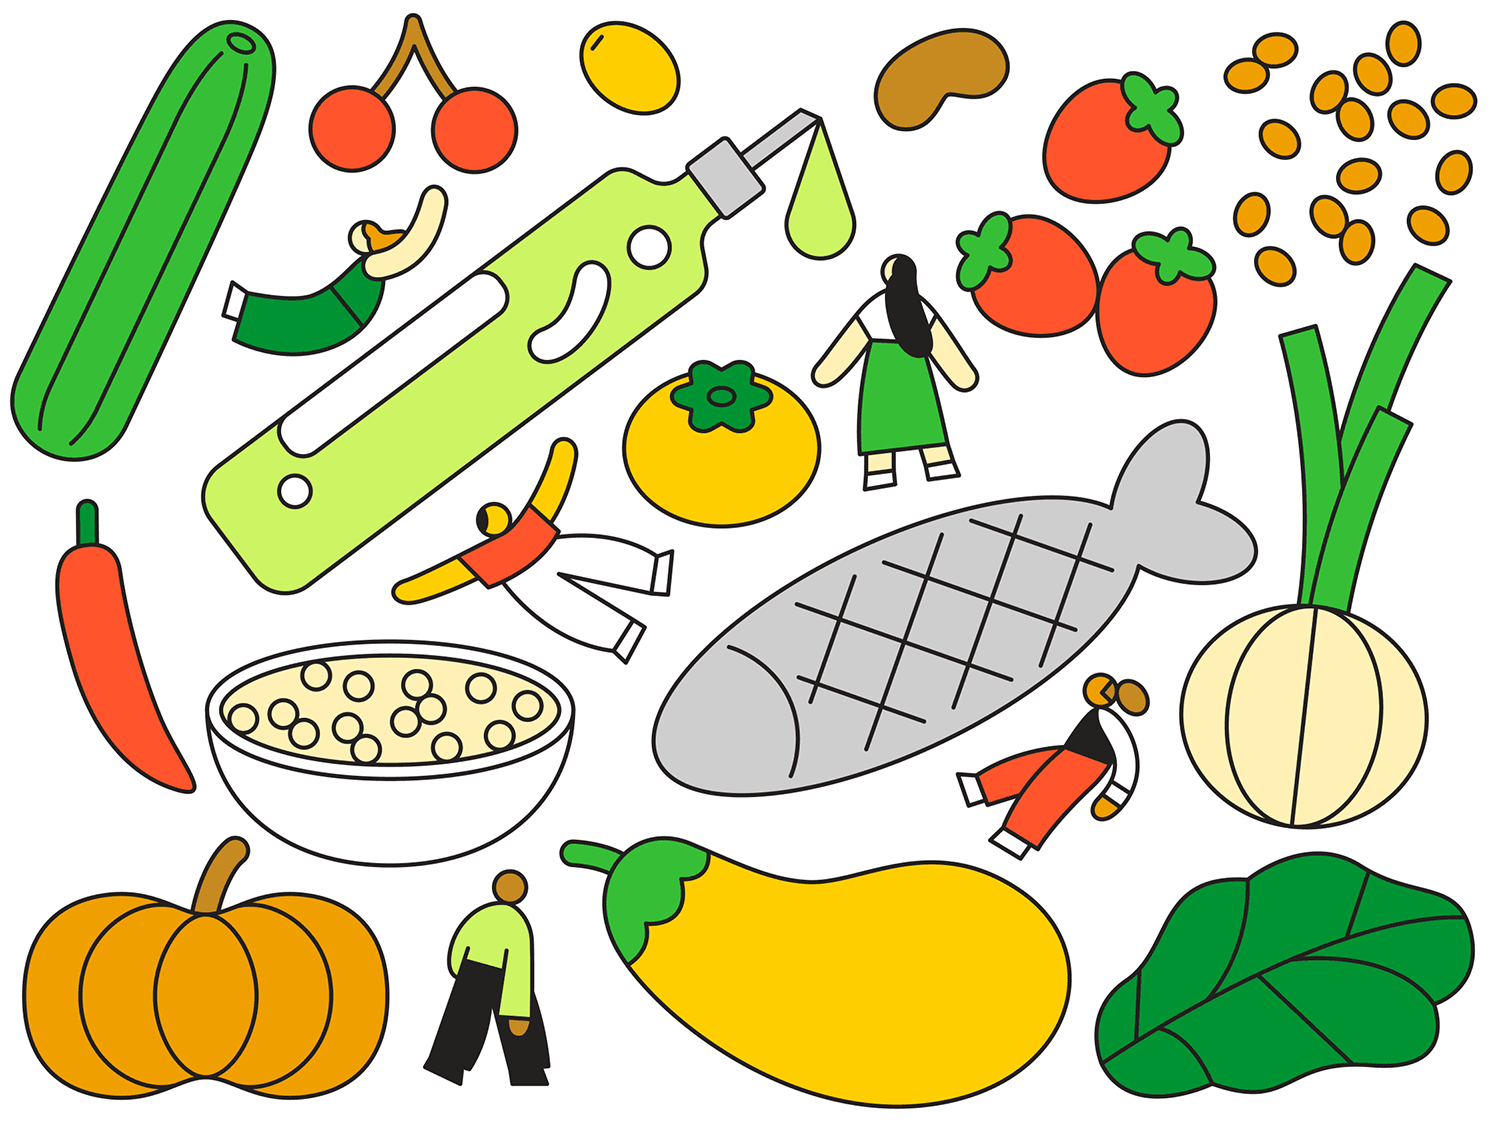 Digital illustration of small-sized people surrounded by giant animated food items, including a fish, a pumpkin, tomatoes, a bottle of oil and a cucumber. 